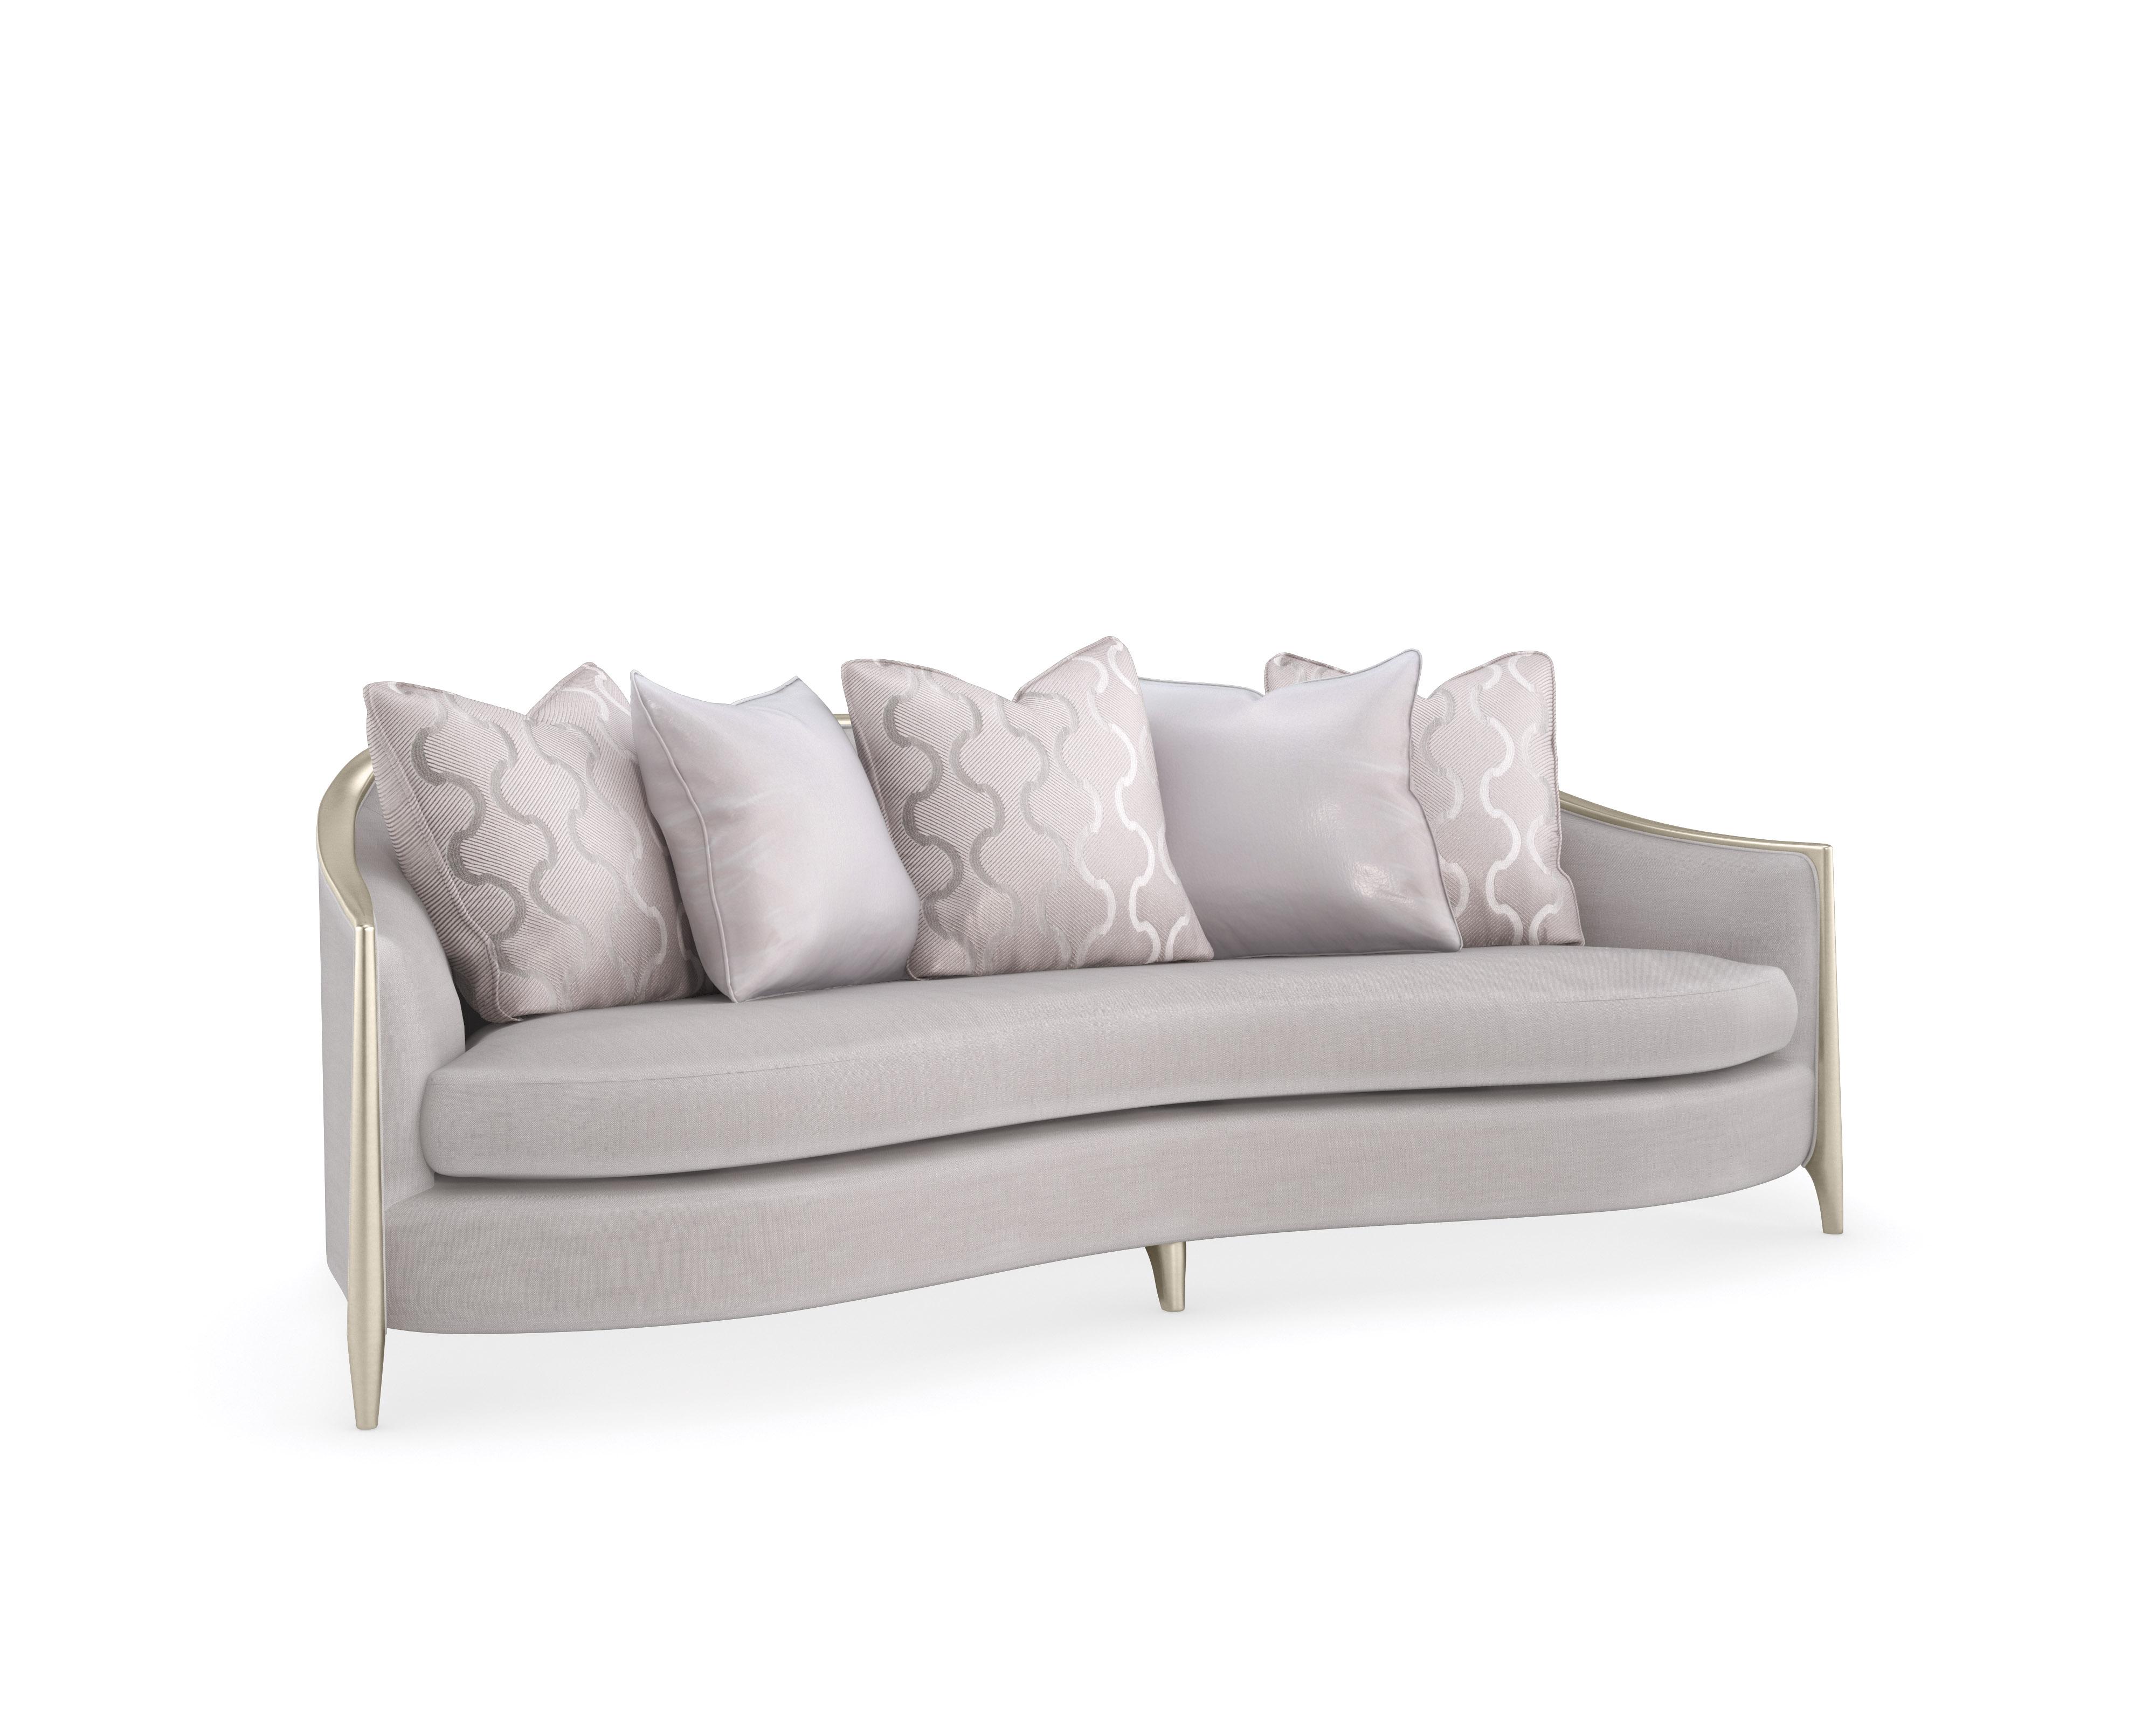 Traditional Sofa SIMPLY STUNNING UPH-421-111-A in Light Gray, Silver Chenille